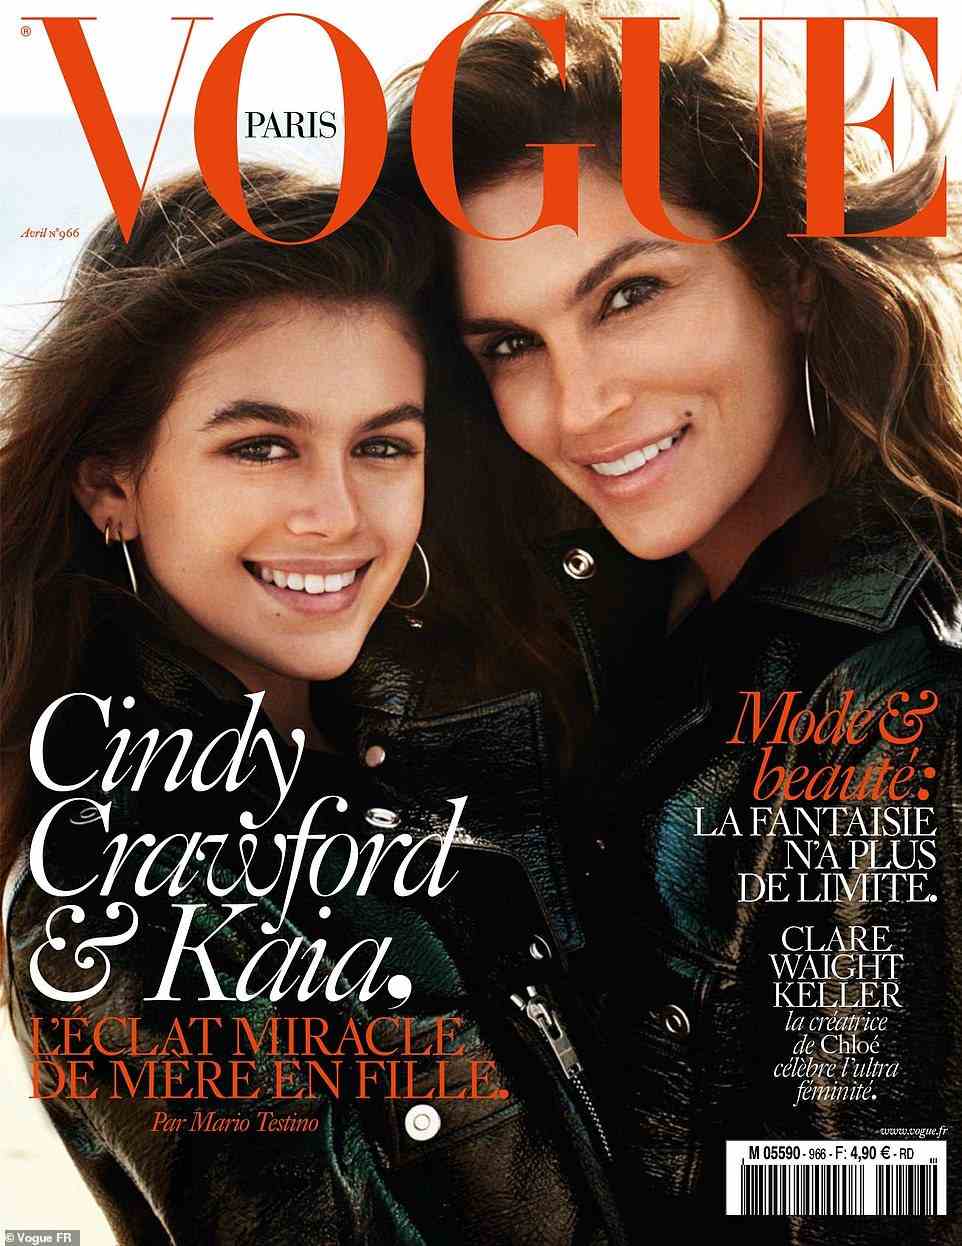 Copy and paste: Supermodel Cindy Crawford joined her daughter Kaia Gerber on the cover of Vogue Paris in 2016